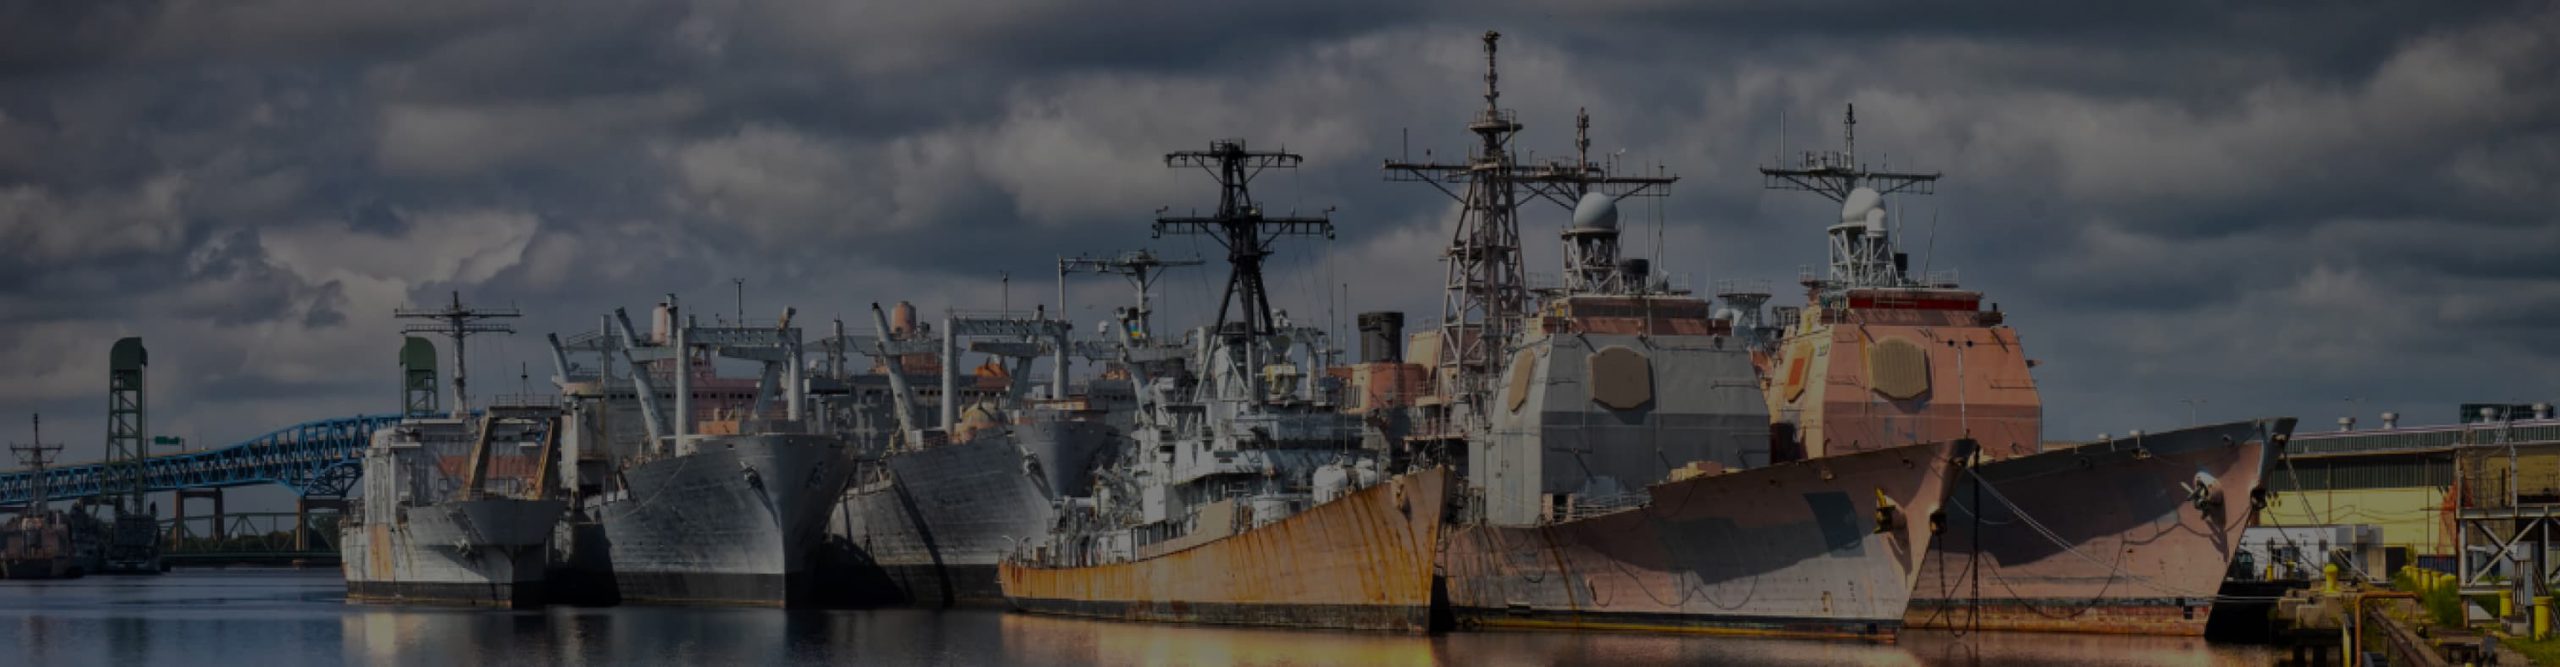 Decommissioned naval vessels, some with their hulls rusting.